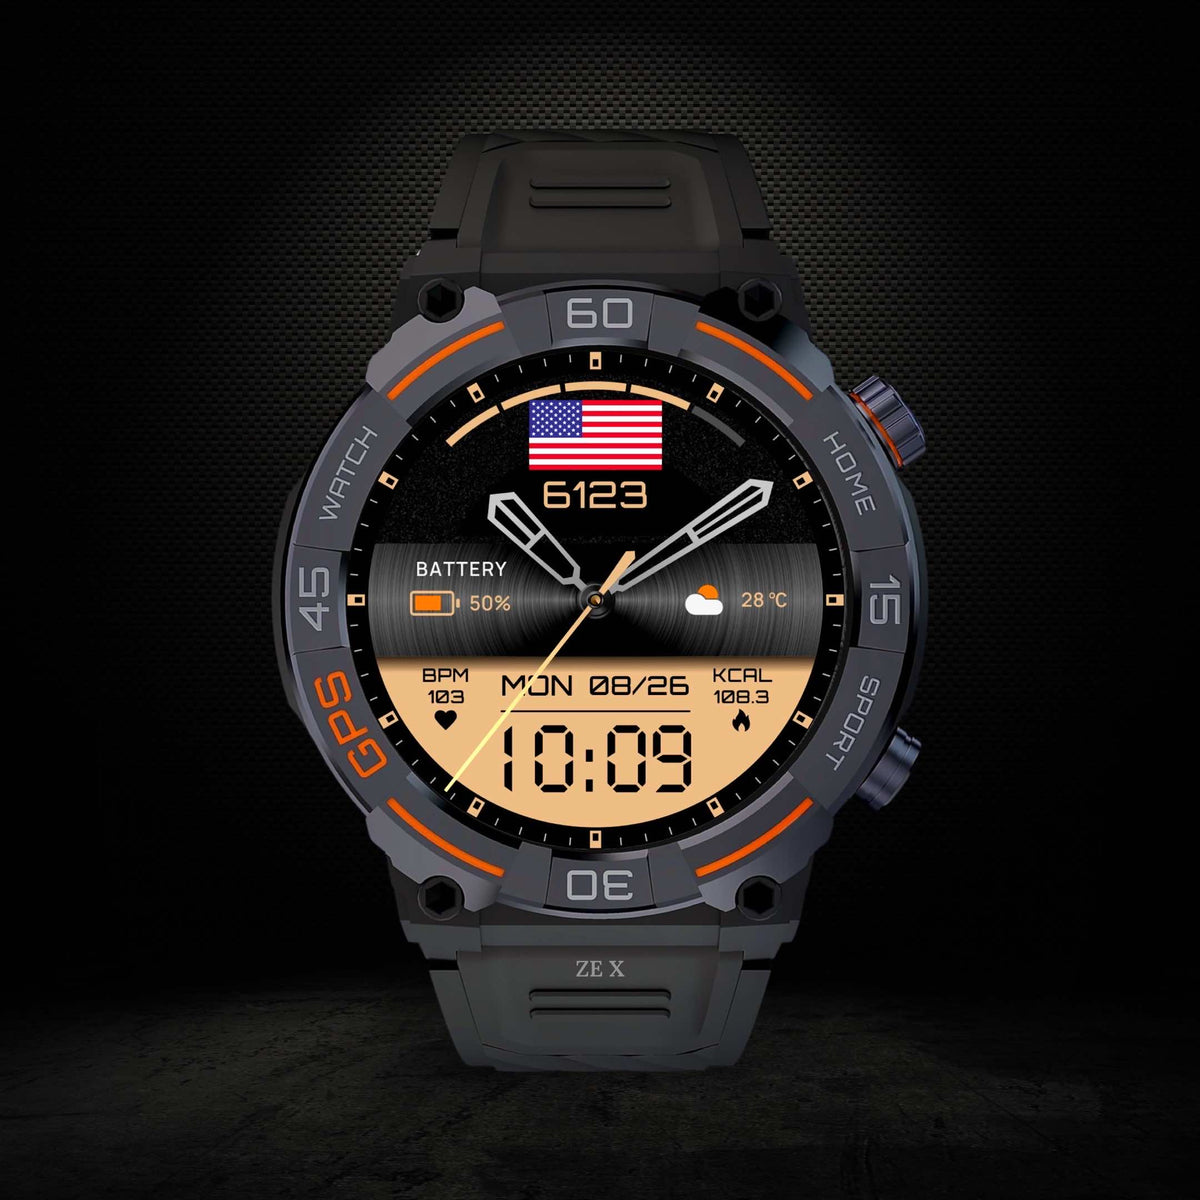 ZE™ X - The Ultimate Smartwatch